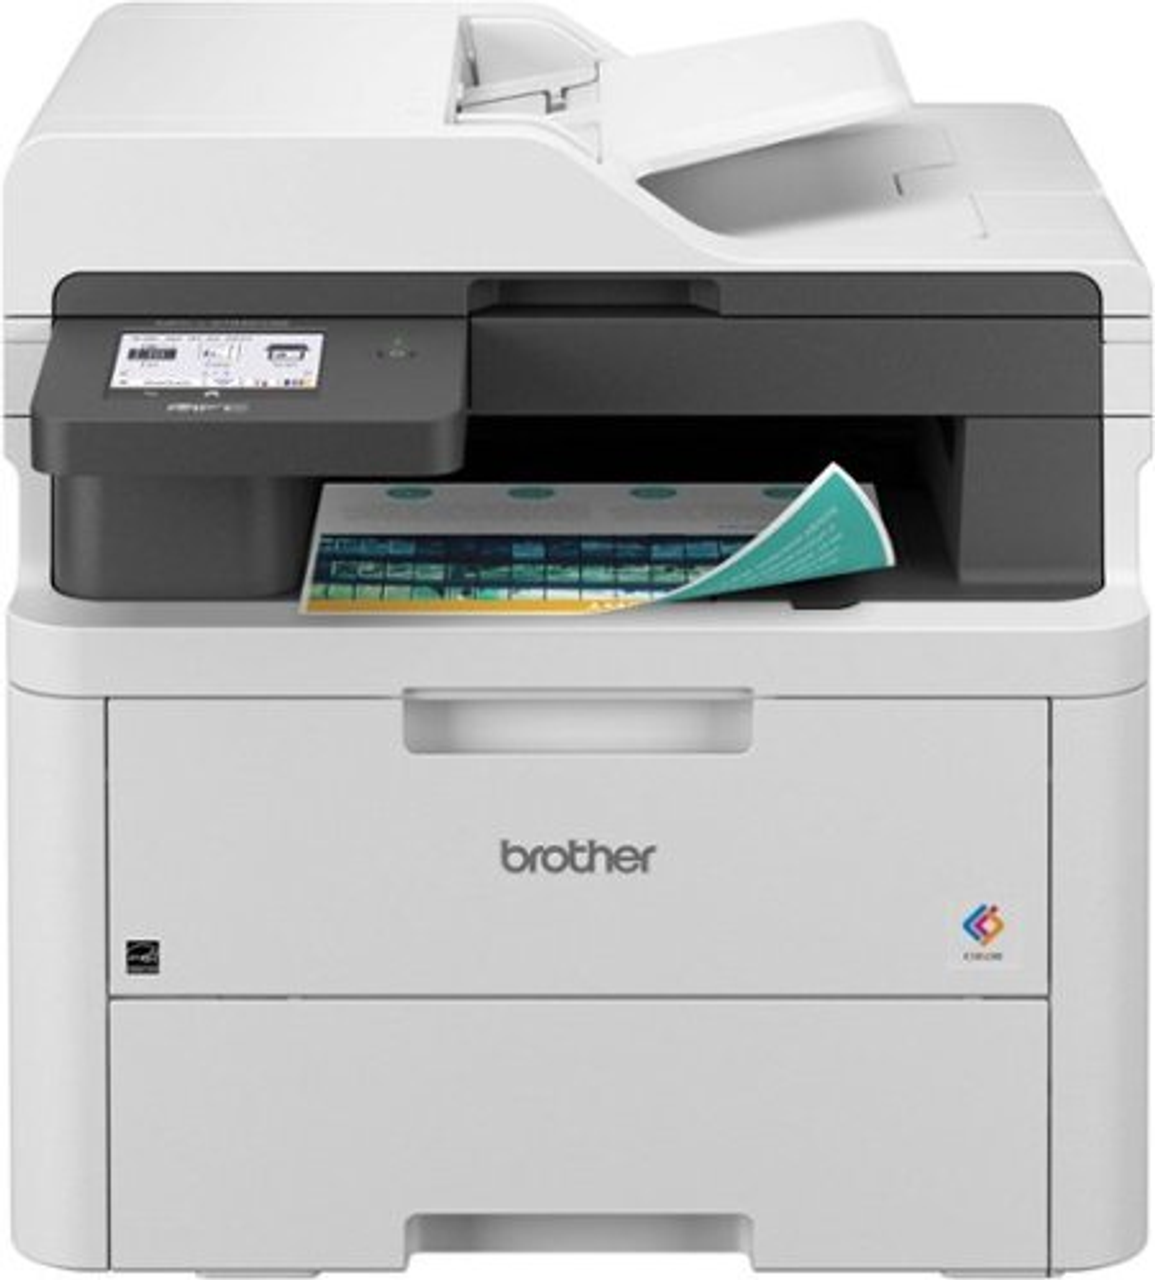 Brother - HL-L3280CDW Wireless Color Digital Printer with Laser Quality Output and Refresh Subscription Eligibility - White